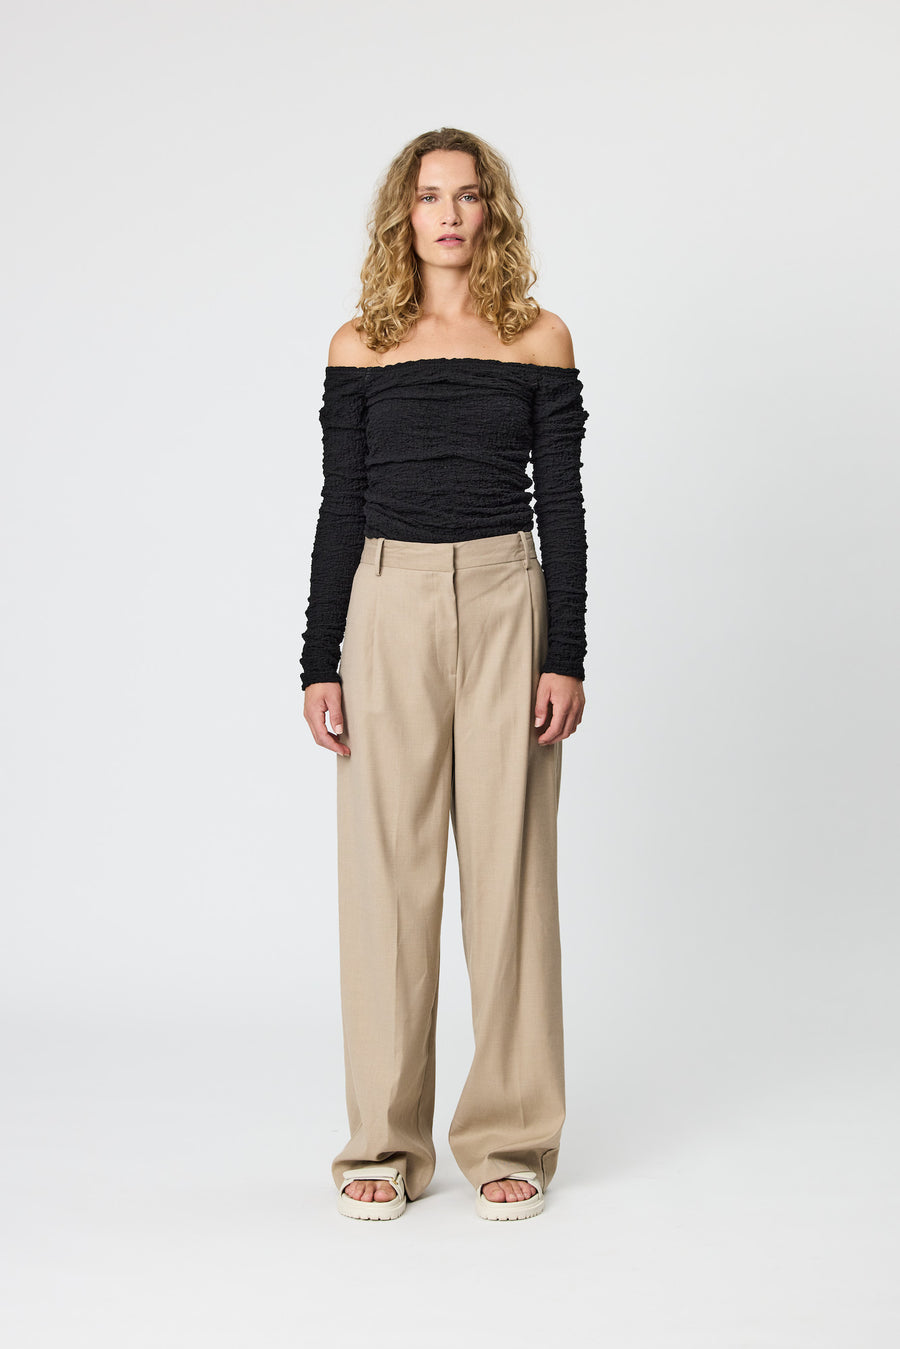 EVIE TAILORED PANTS - OAT